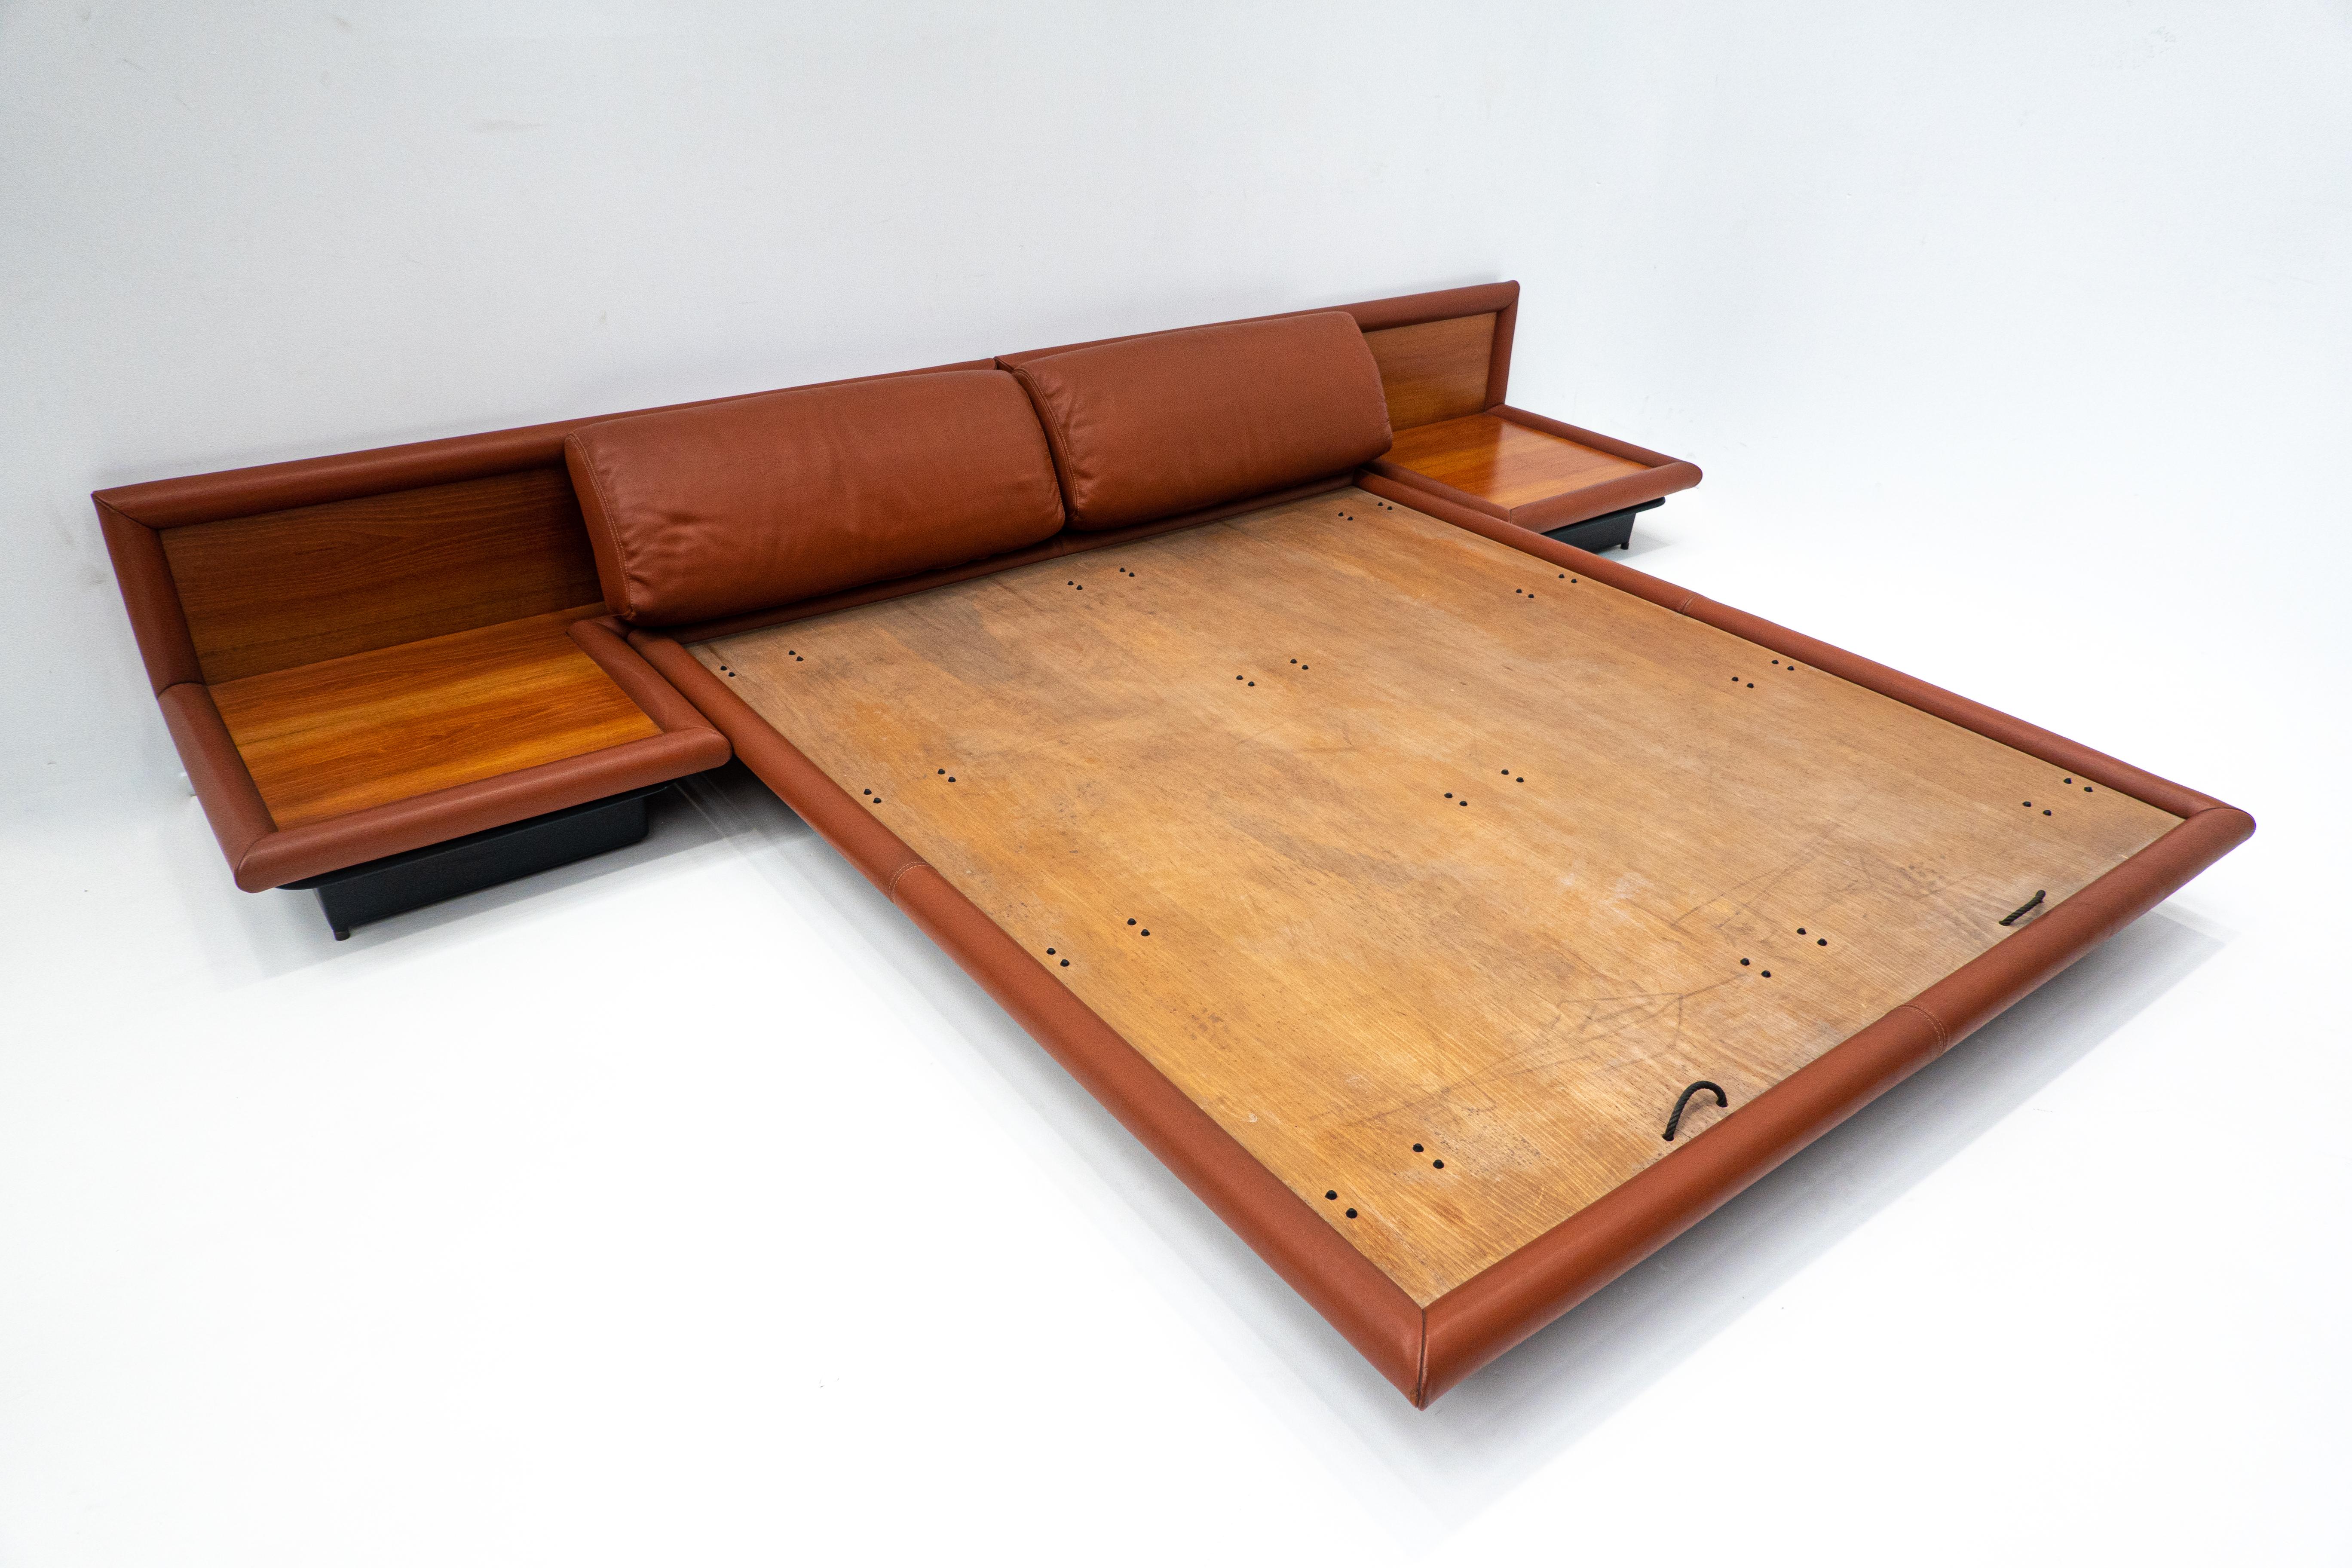 Afra & Tobia Scarpa Cognac Leather Bed Model Morna for Molteni, Italy, 1972


Afra (1937-2011) & Tobia (1935-) Scarpa are a duo of Italian architects. They are know worldwide for their postmodern style. 

Tobia Scarpa is son of the well-known